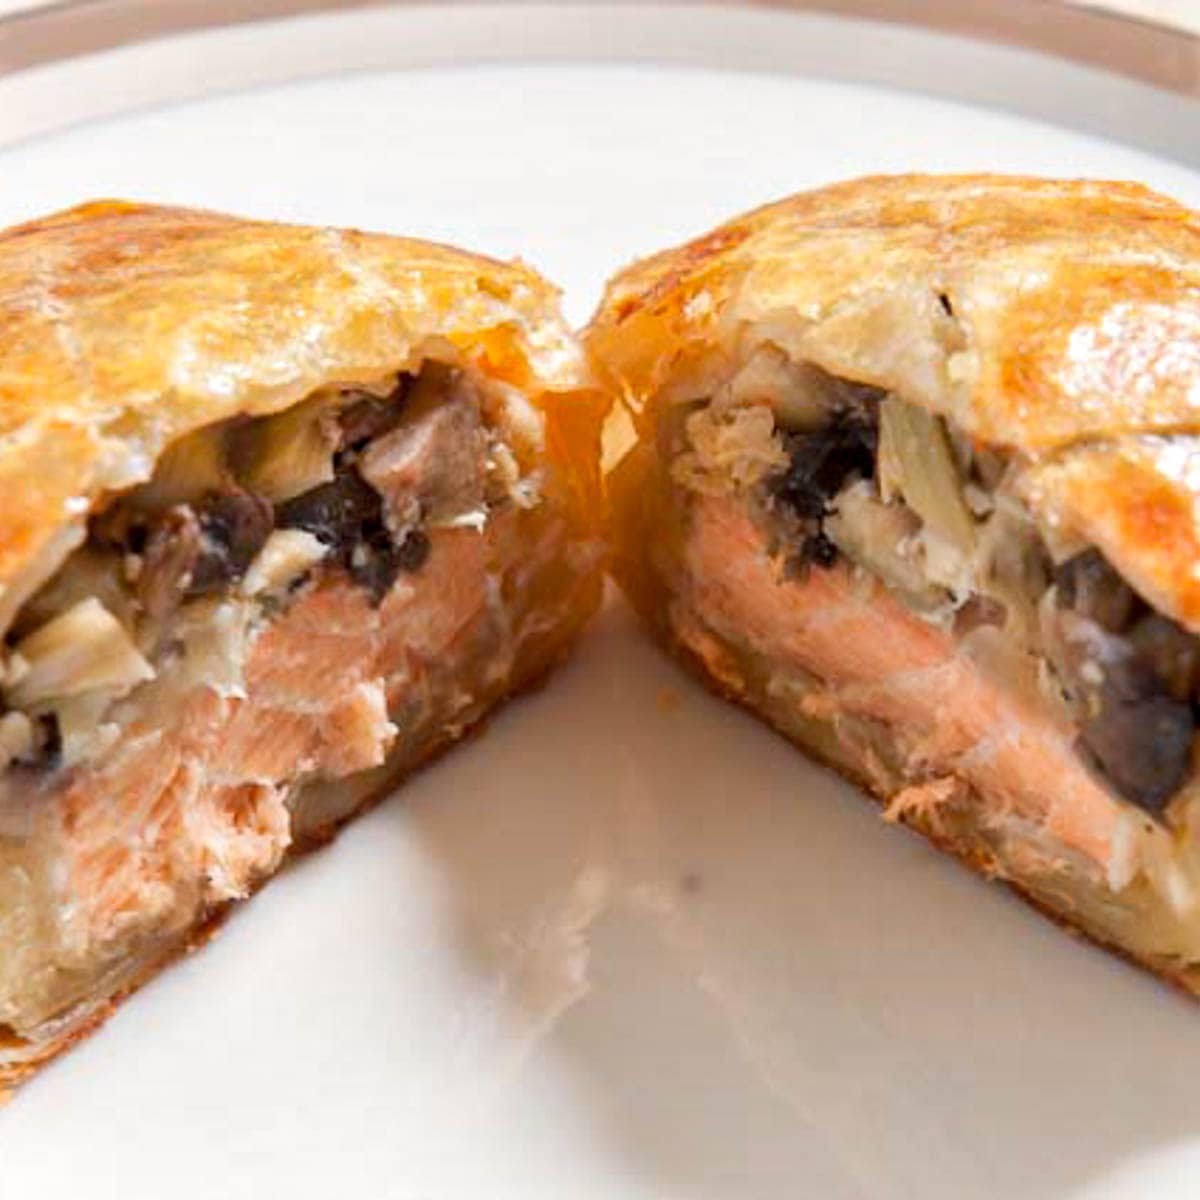 Salmon Wellington cut open to expose the filling on a plate